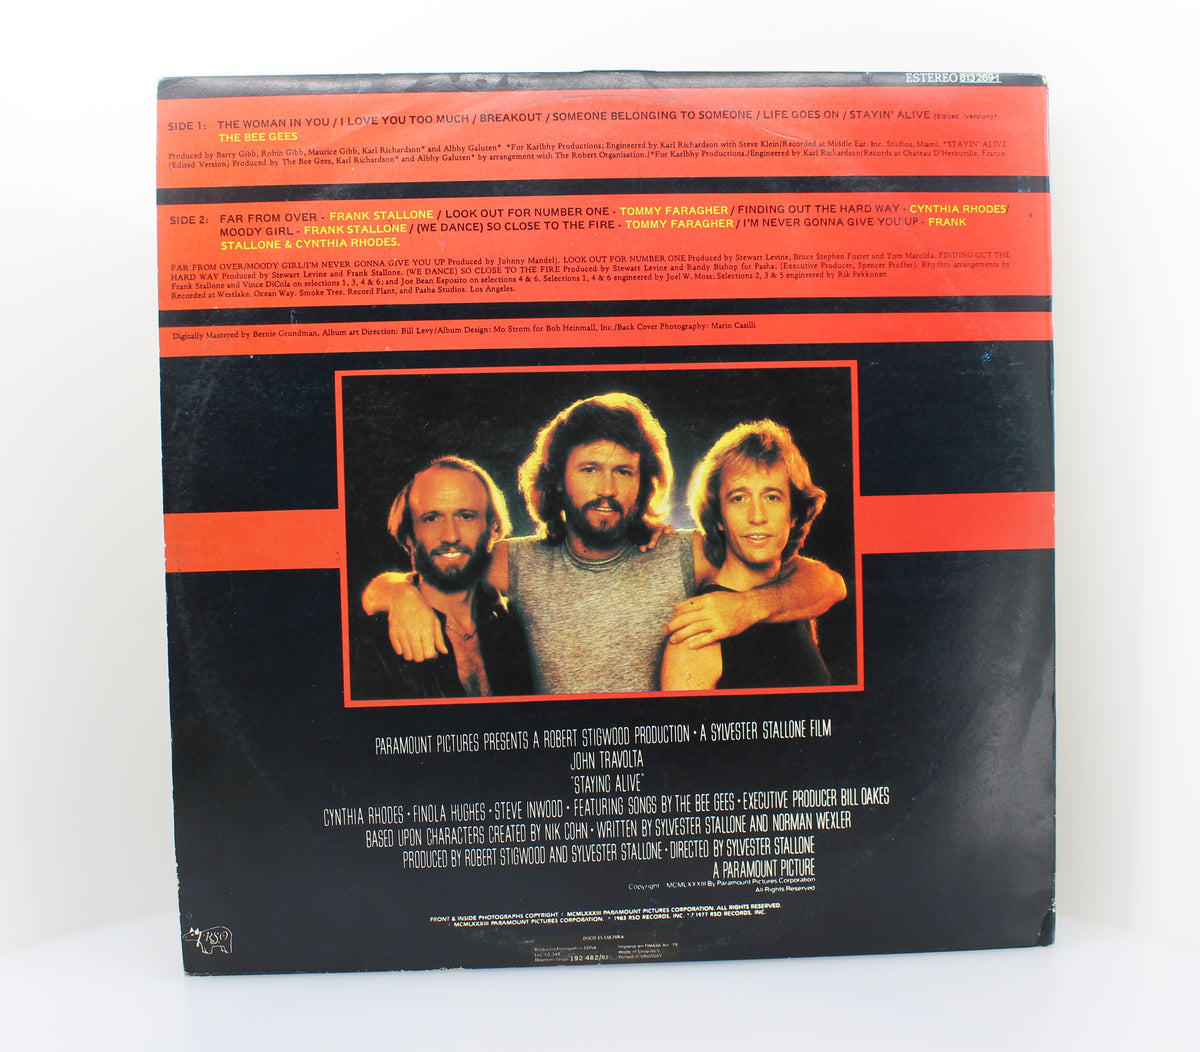 Bee Gees - Staying Alive, Vinyl (33⅓ rpm), Uruguay 1983